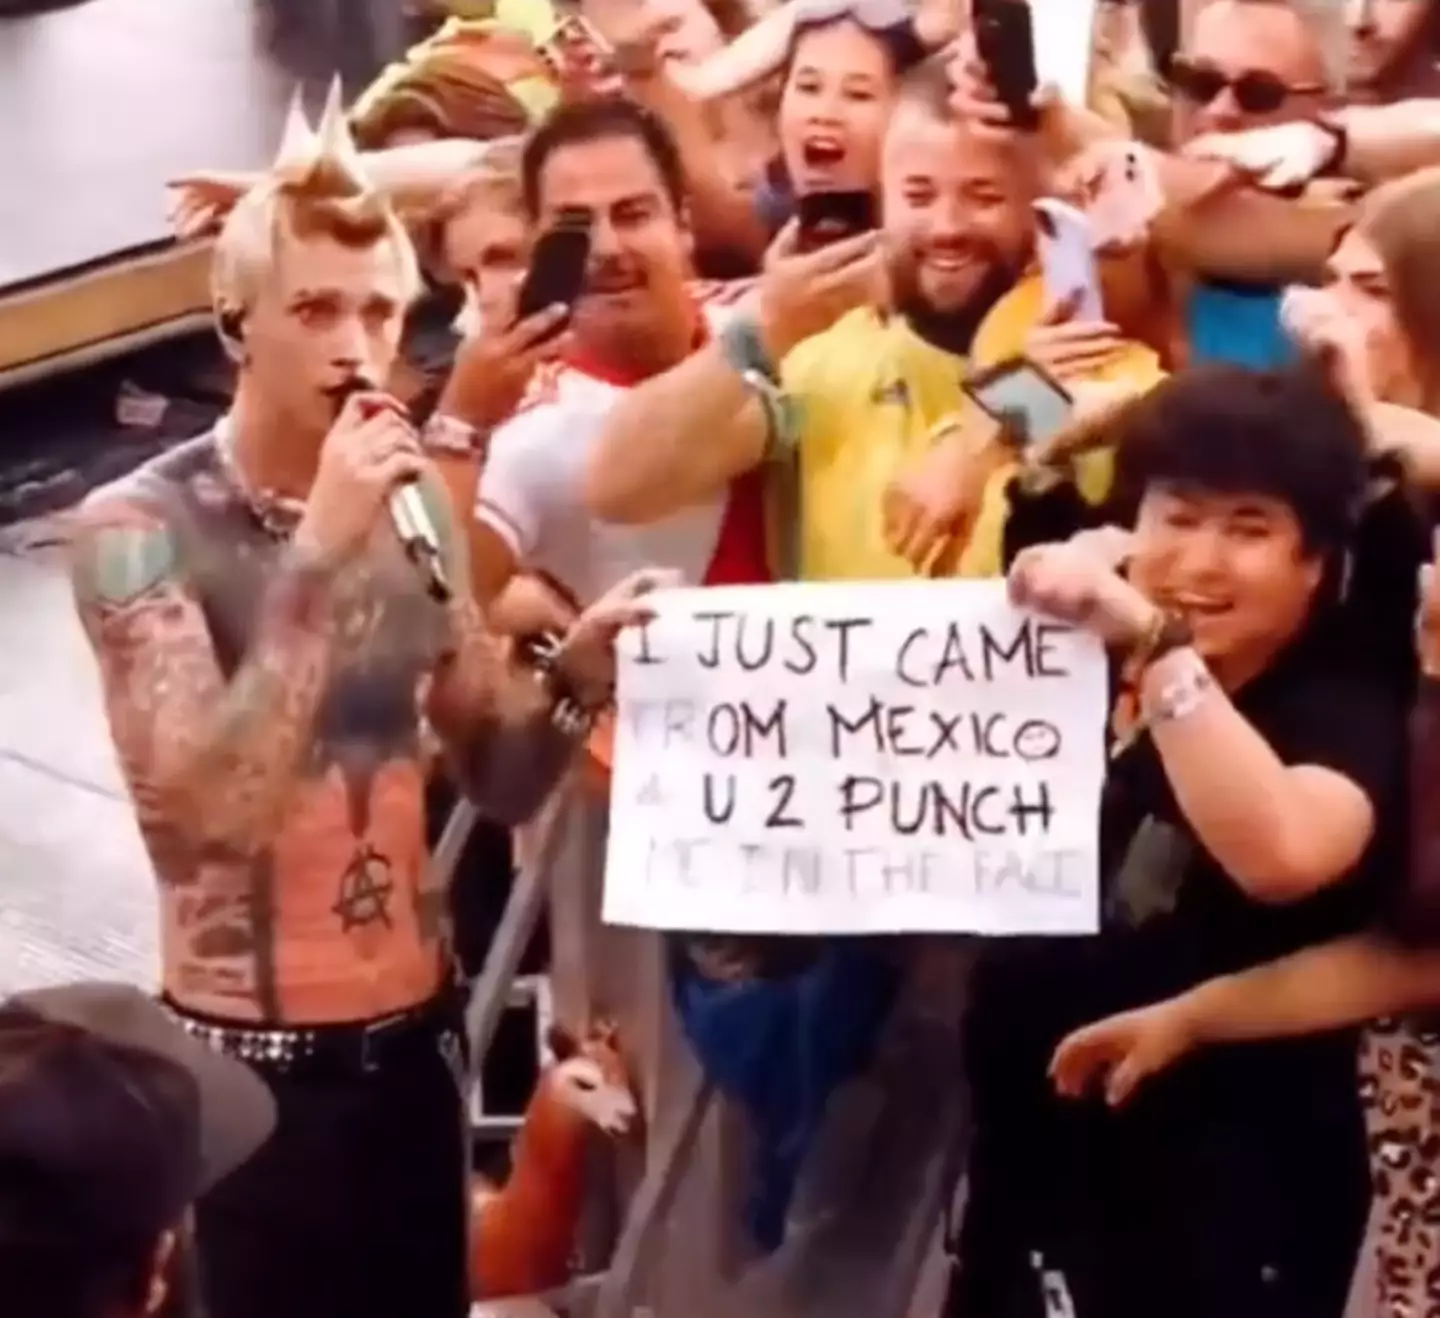 The fan flew all the way from Mexico to Belgium in the hopes of getting a punch from MGK.